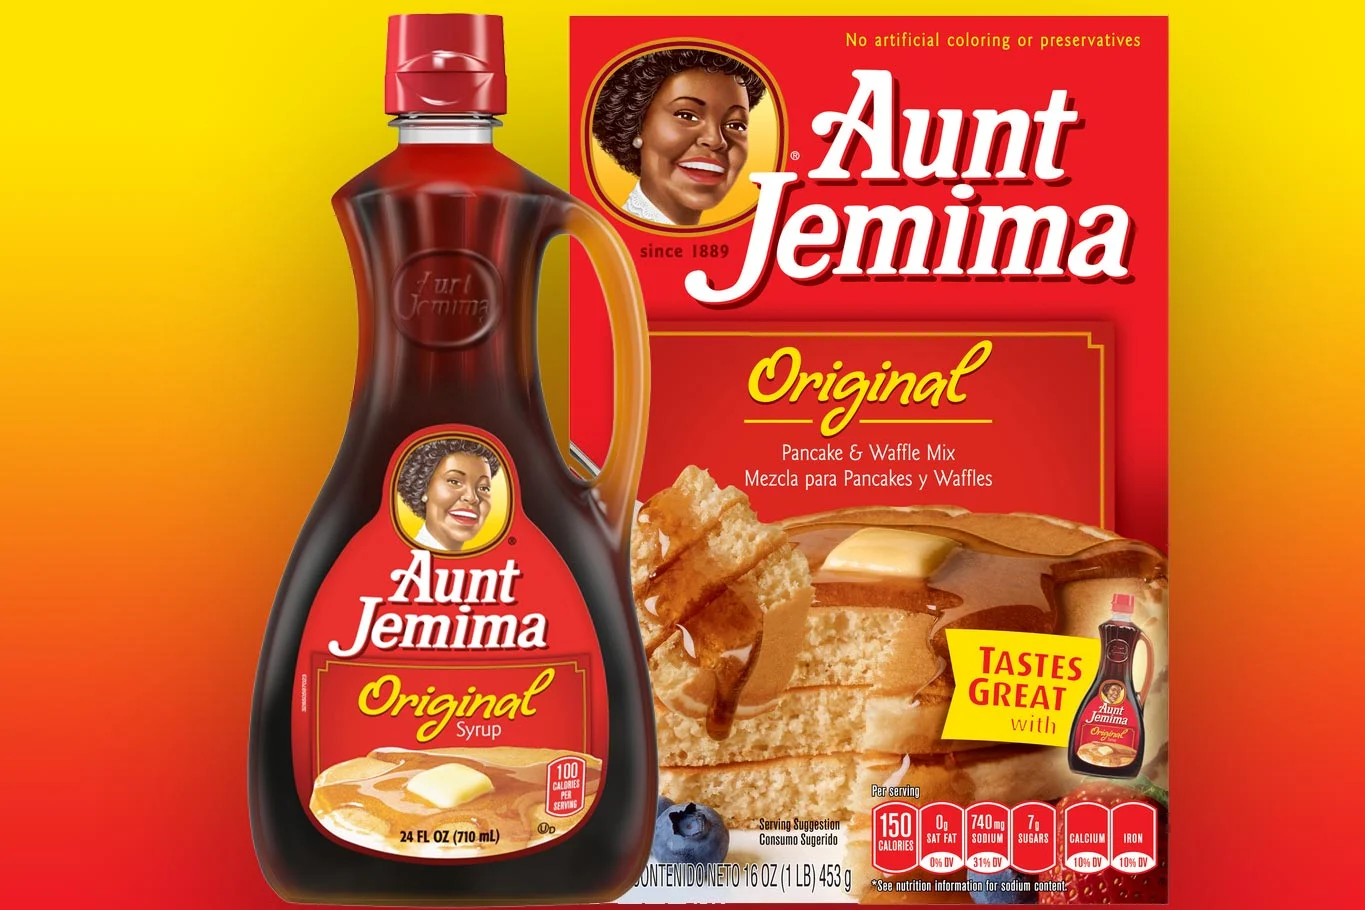 Aunt Jemima Brand to Change Name and Image Over ‘Racial Stereotype’